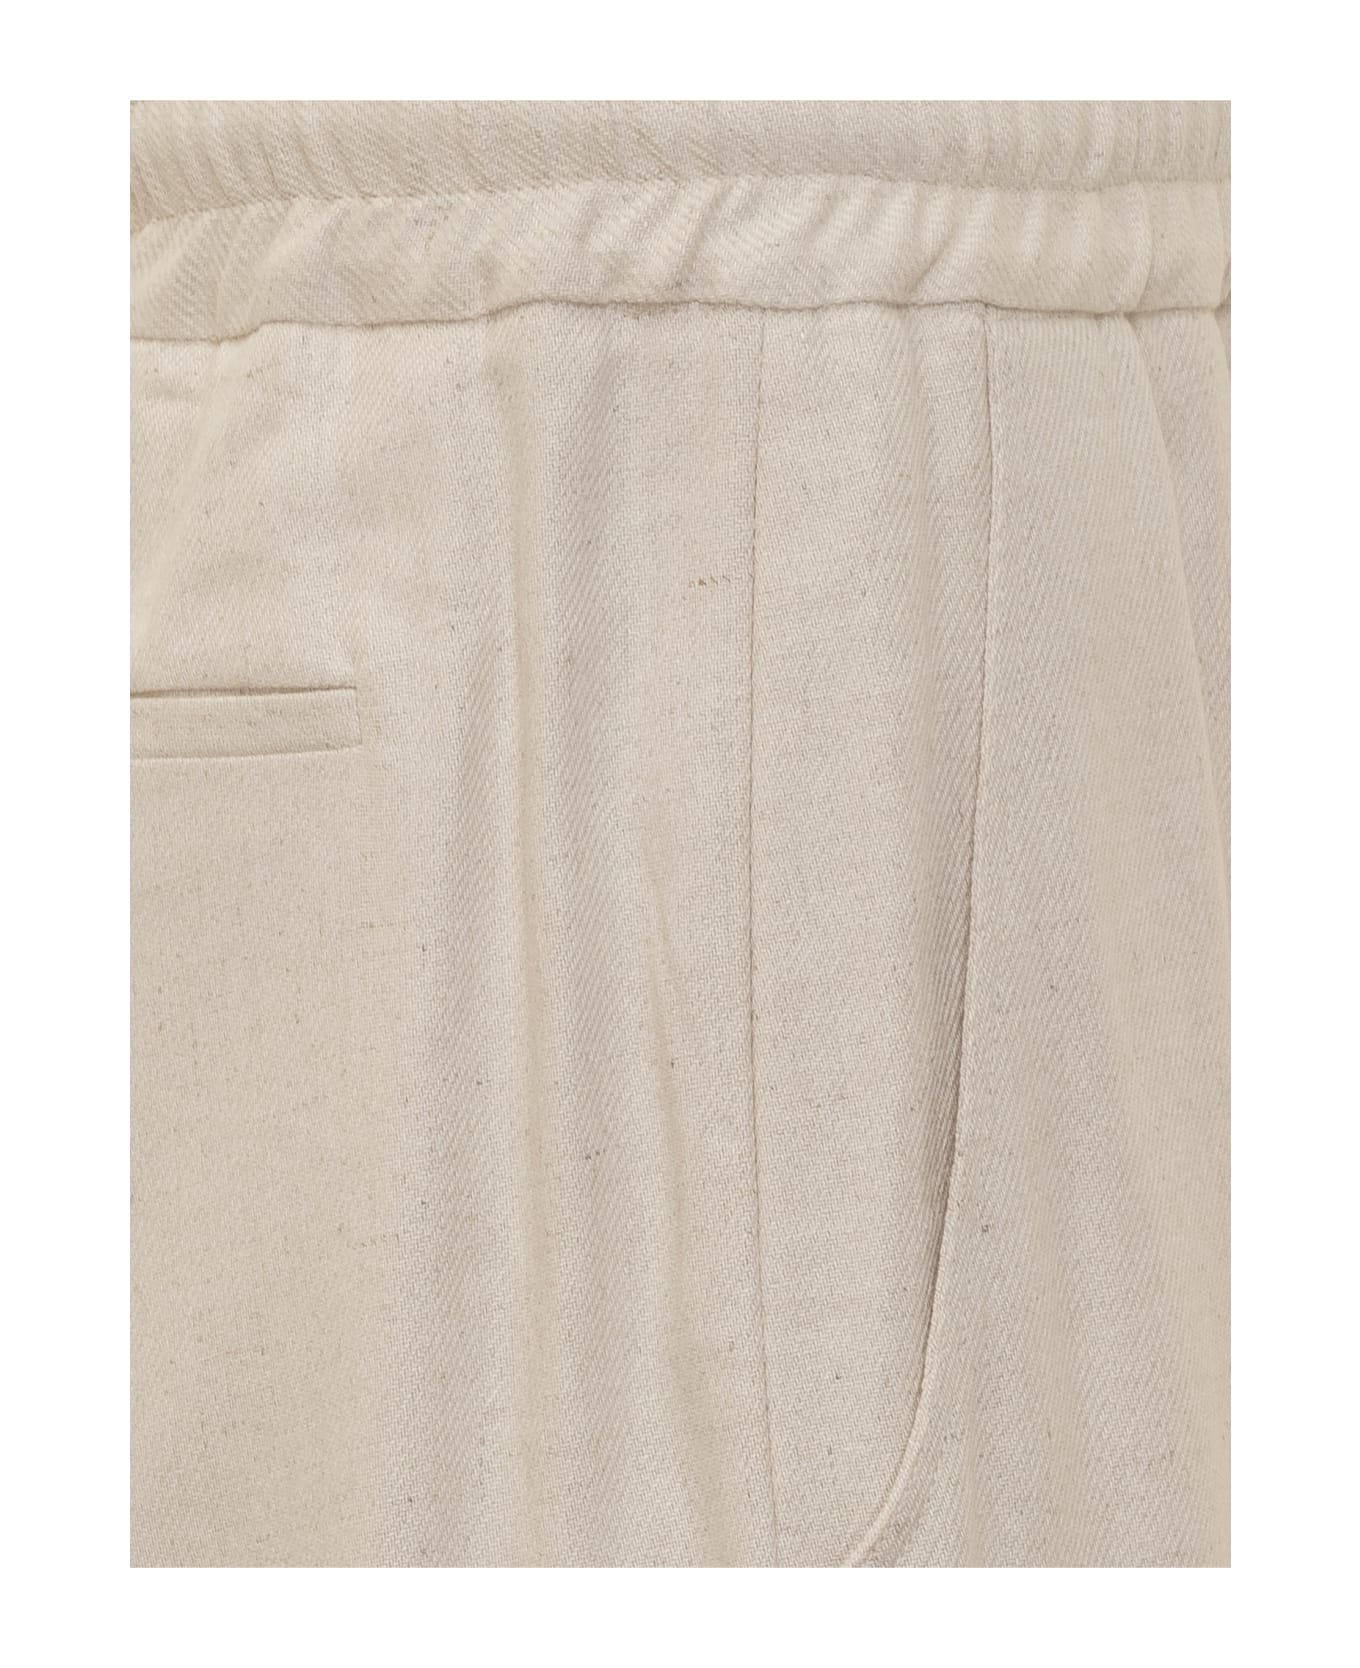 GCDS Linen Blend Wide Pants - OFF-WHITE ボトムス